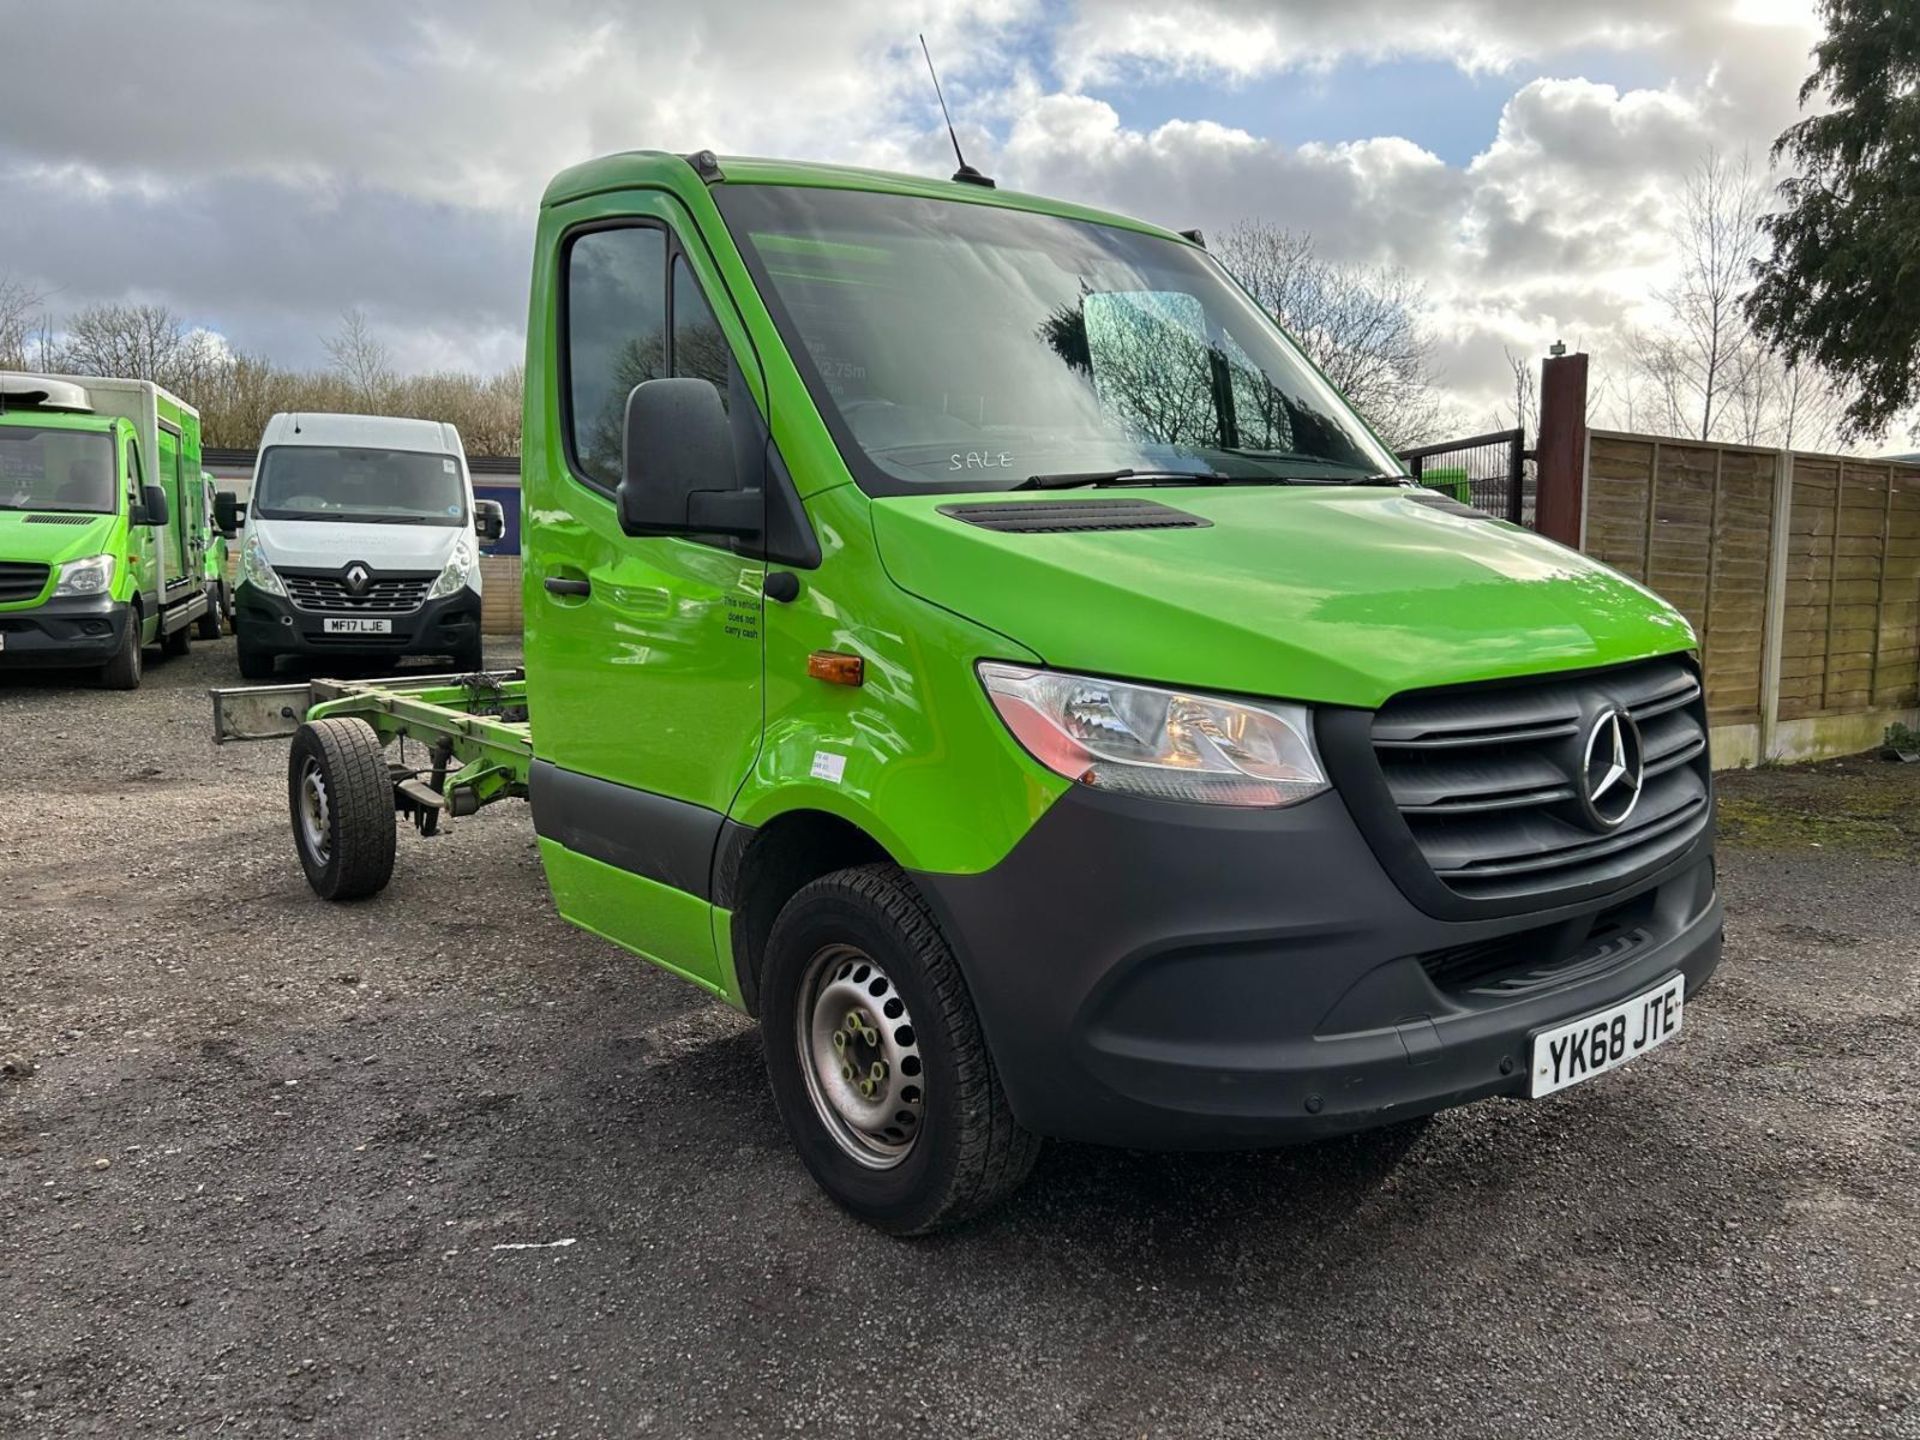 >>>SPECIAL CLEARANCE<<< 2019 MERCEDES SPRINTER 314 CDI: RWD FRIDGE FREEZER CHASSIS CAB